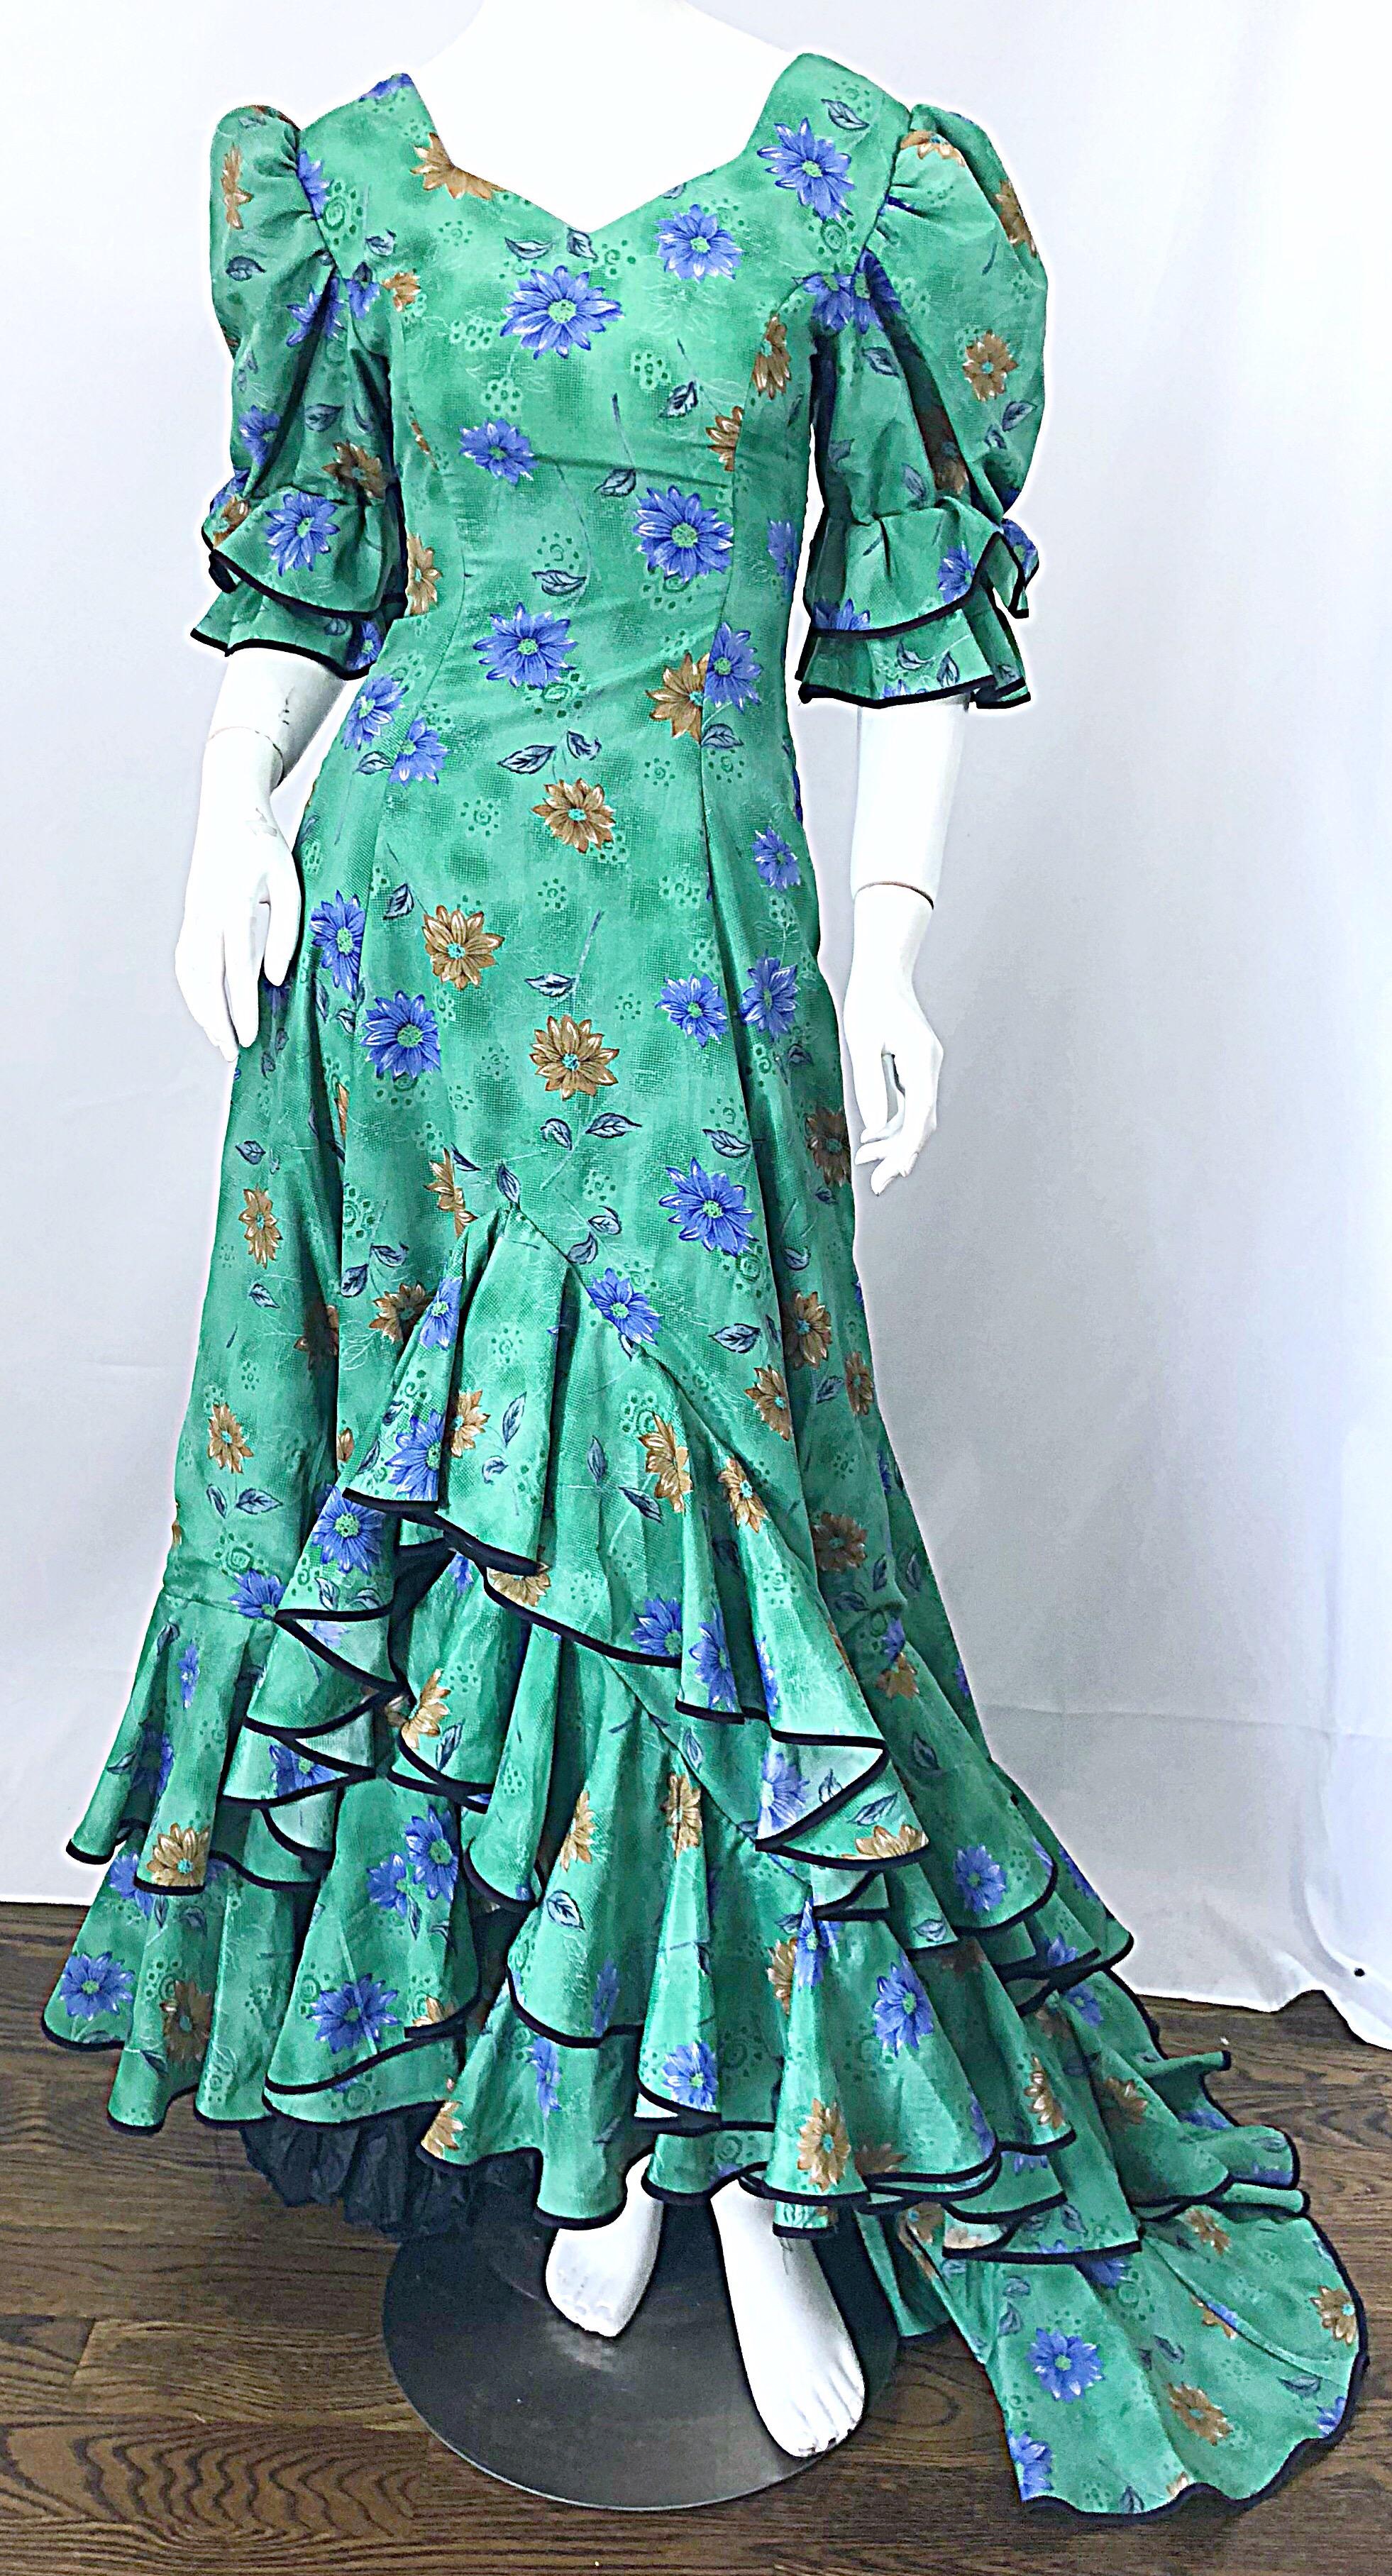 Women's Amazing Vintage Victorian Inspired 1970s Does 1800s Steampunk Green Trained Gown For Sale